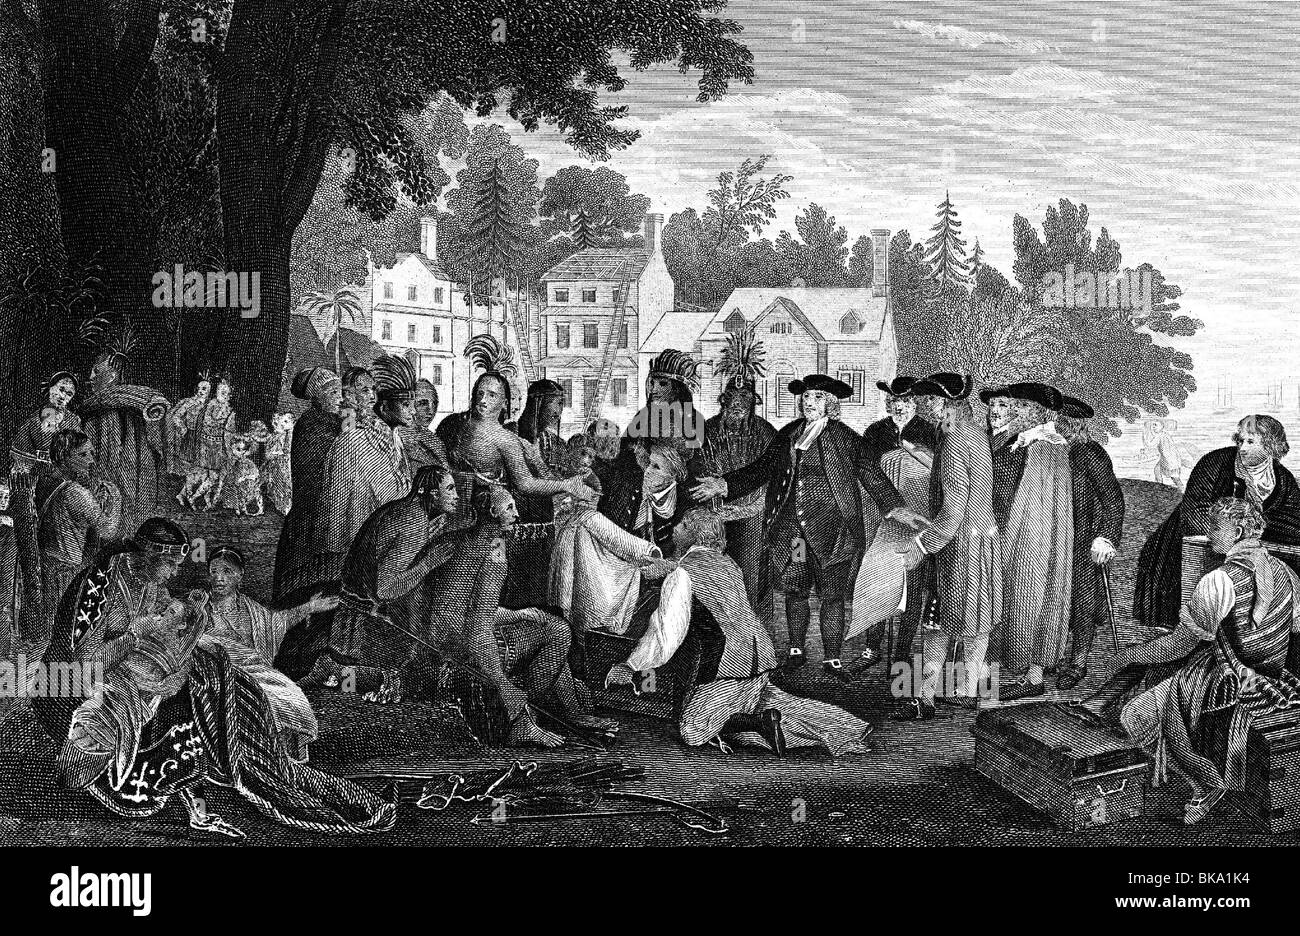 geography / travel, United States of America, American Indians, Treaty of William Penn with Indians, steel engraving after painting by Benjamin West, circa 18th century, historic, historical, North America, people, conclude a contract, Stock Photo